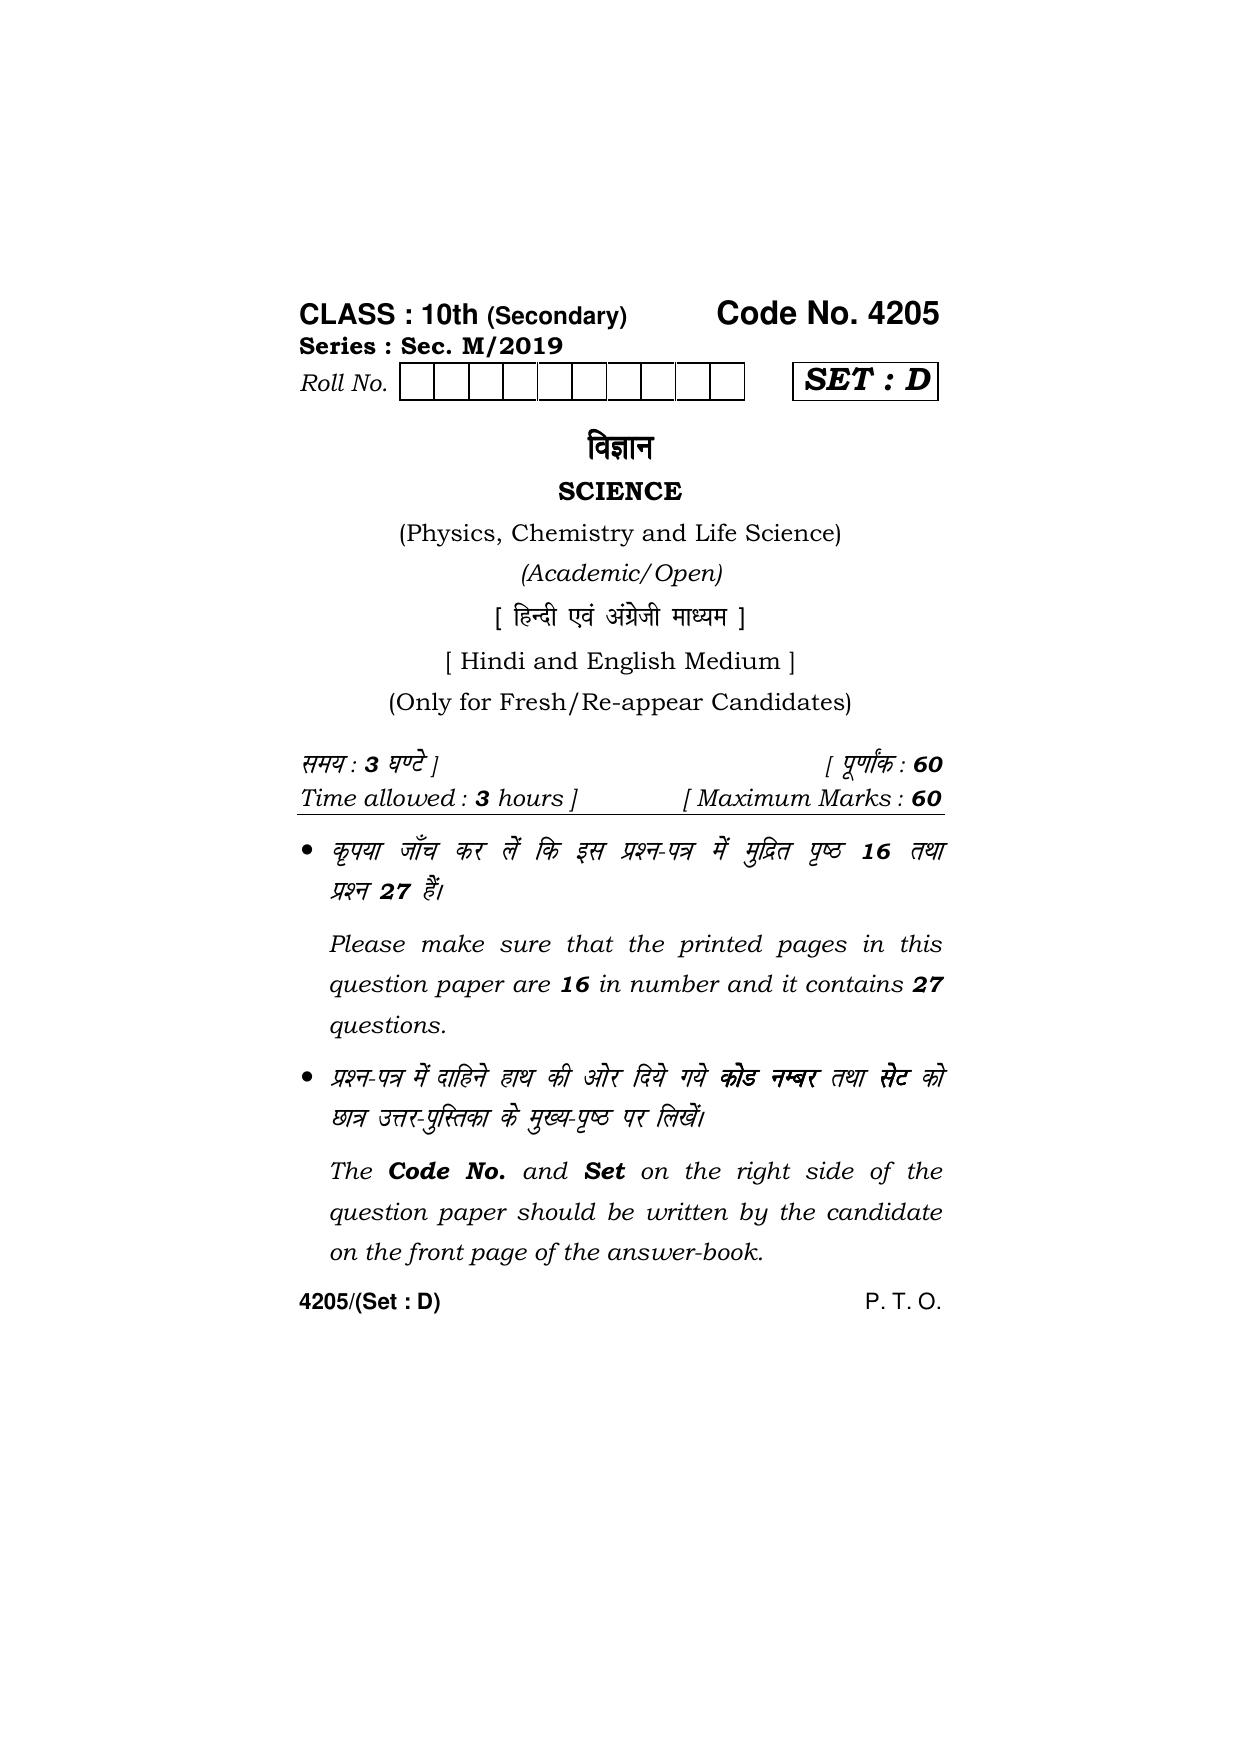 Haryana Board HBSE Class 10 Science (All Set) 2019 Question Paper - Page 49